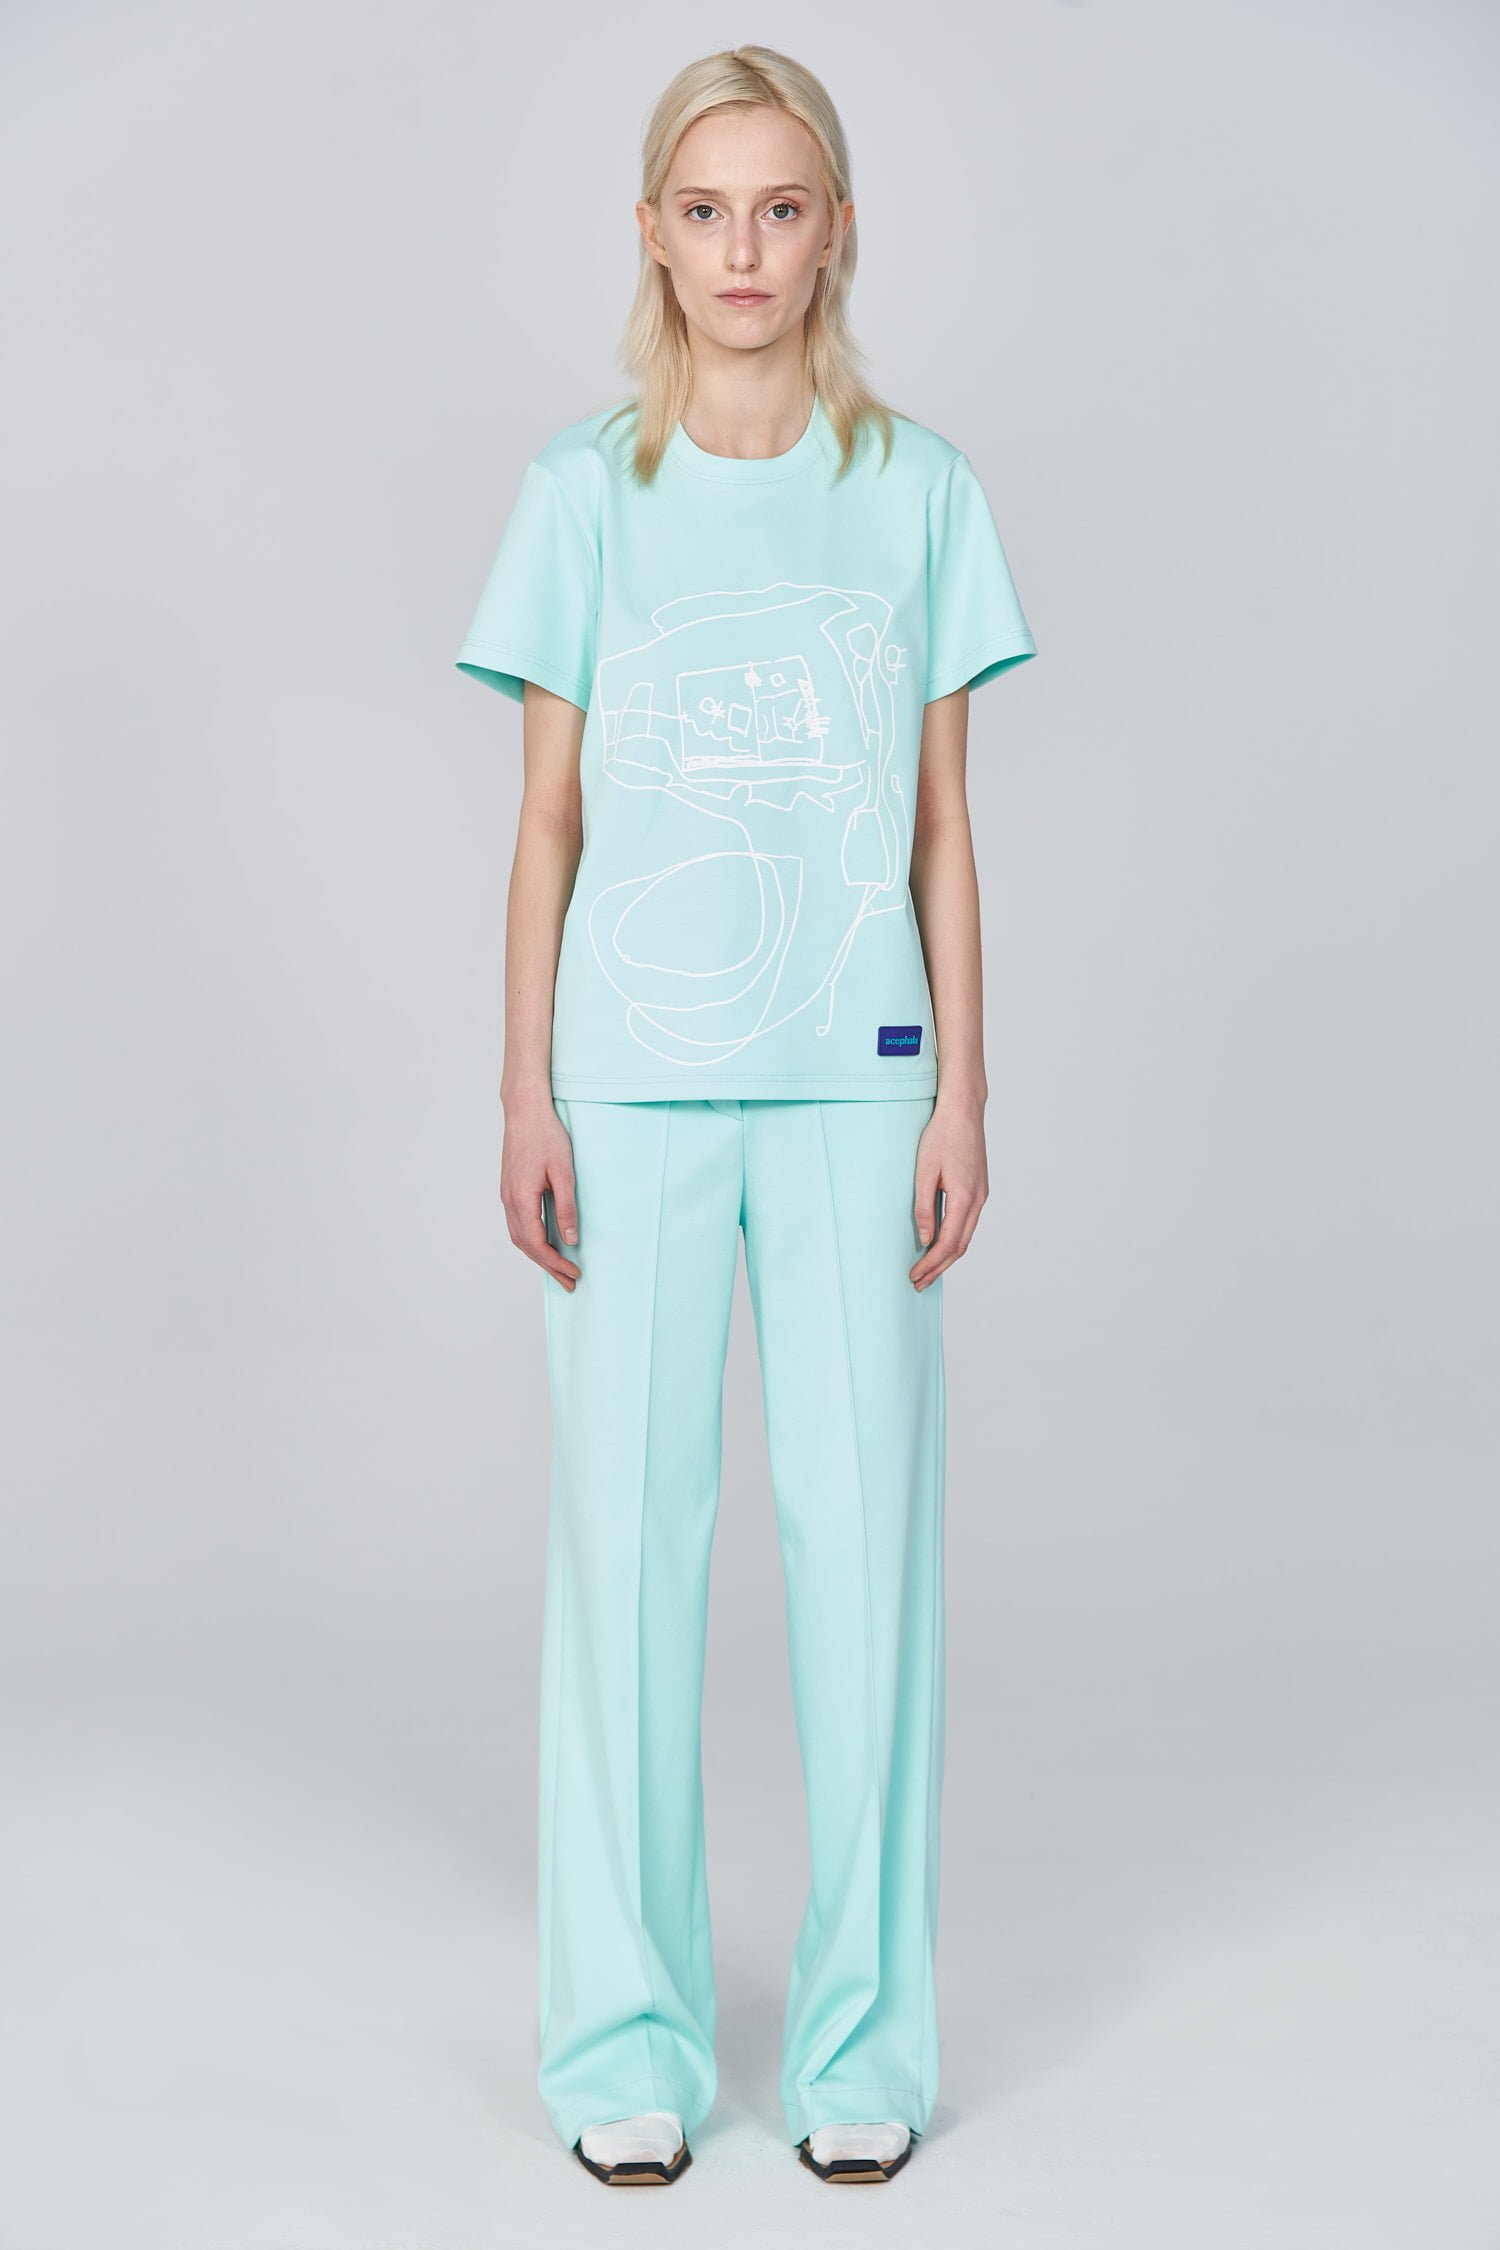 Acephala Ss21 Mint T Shirt Flared Trousers Front